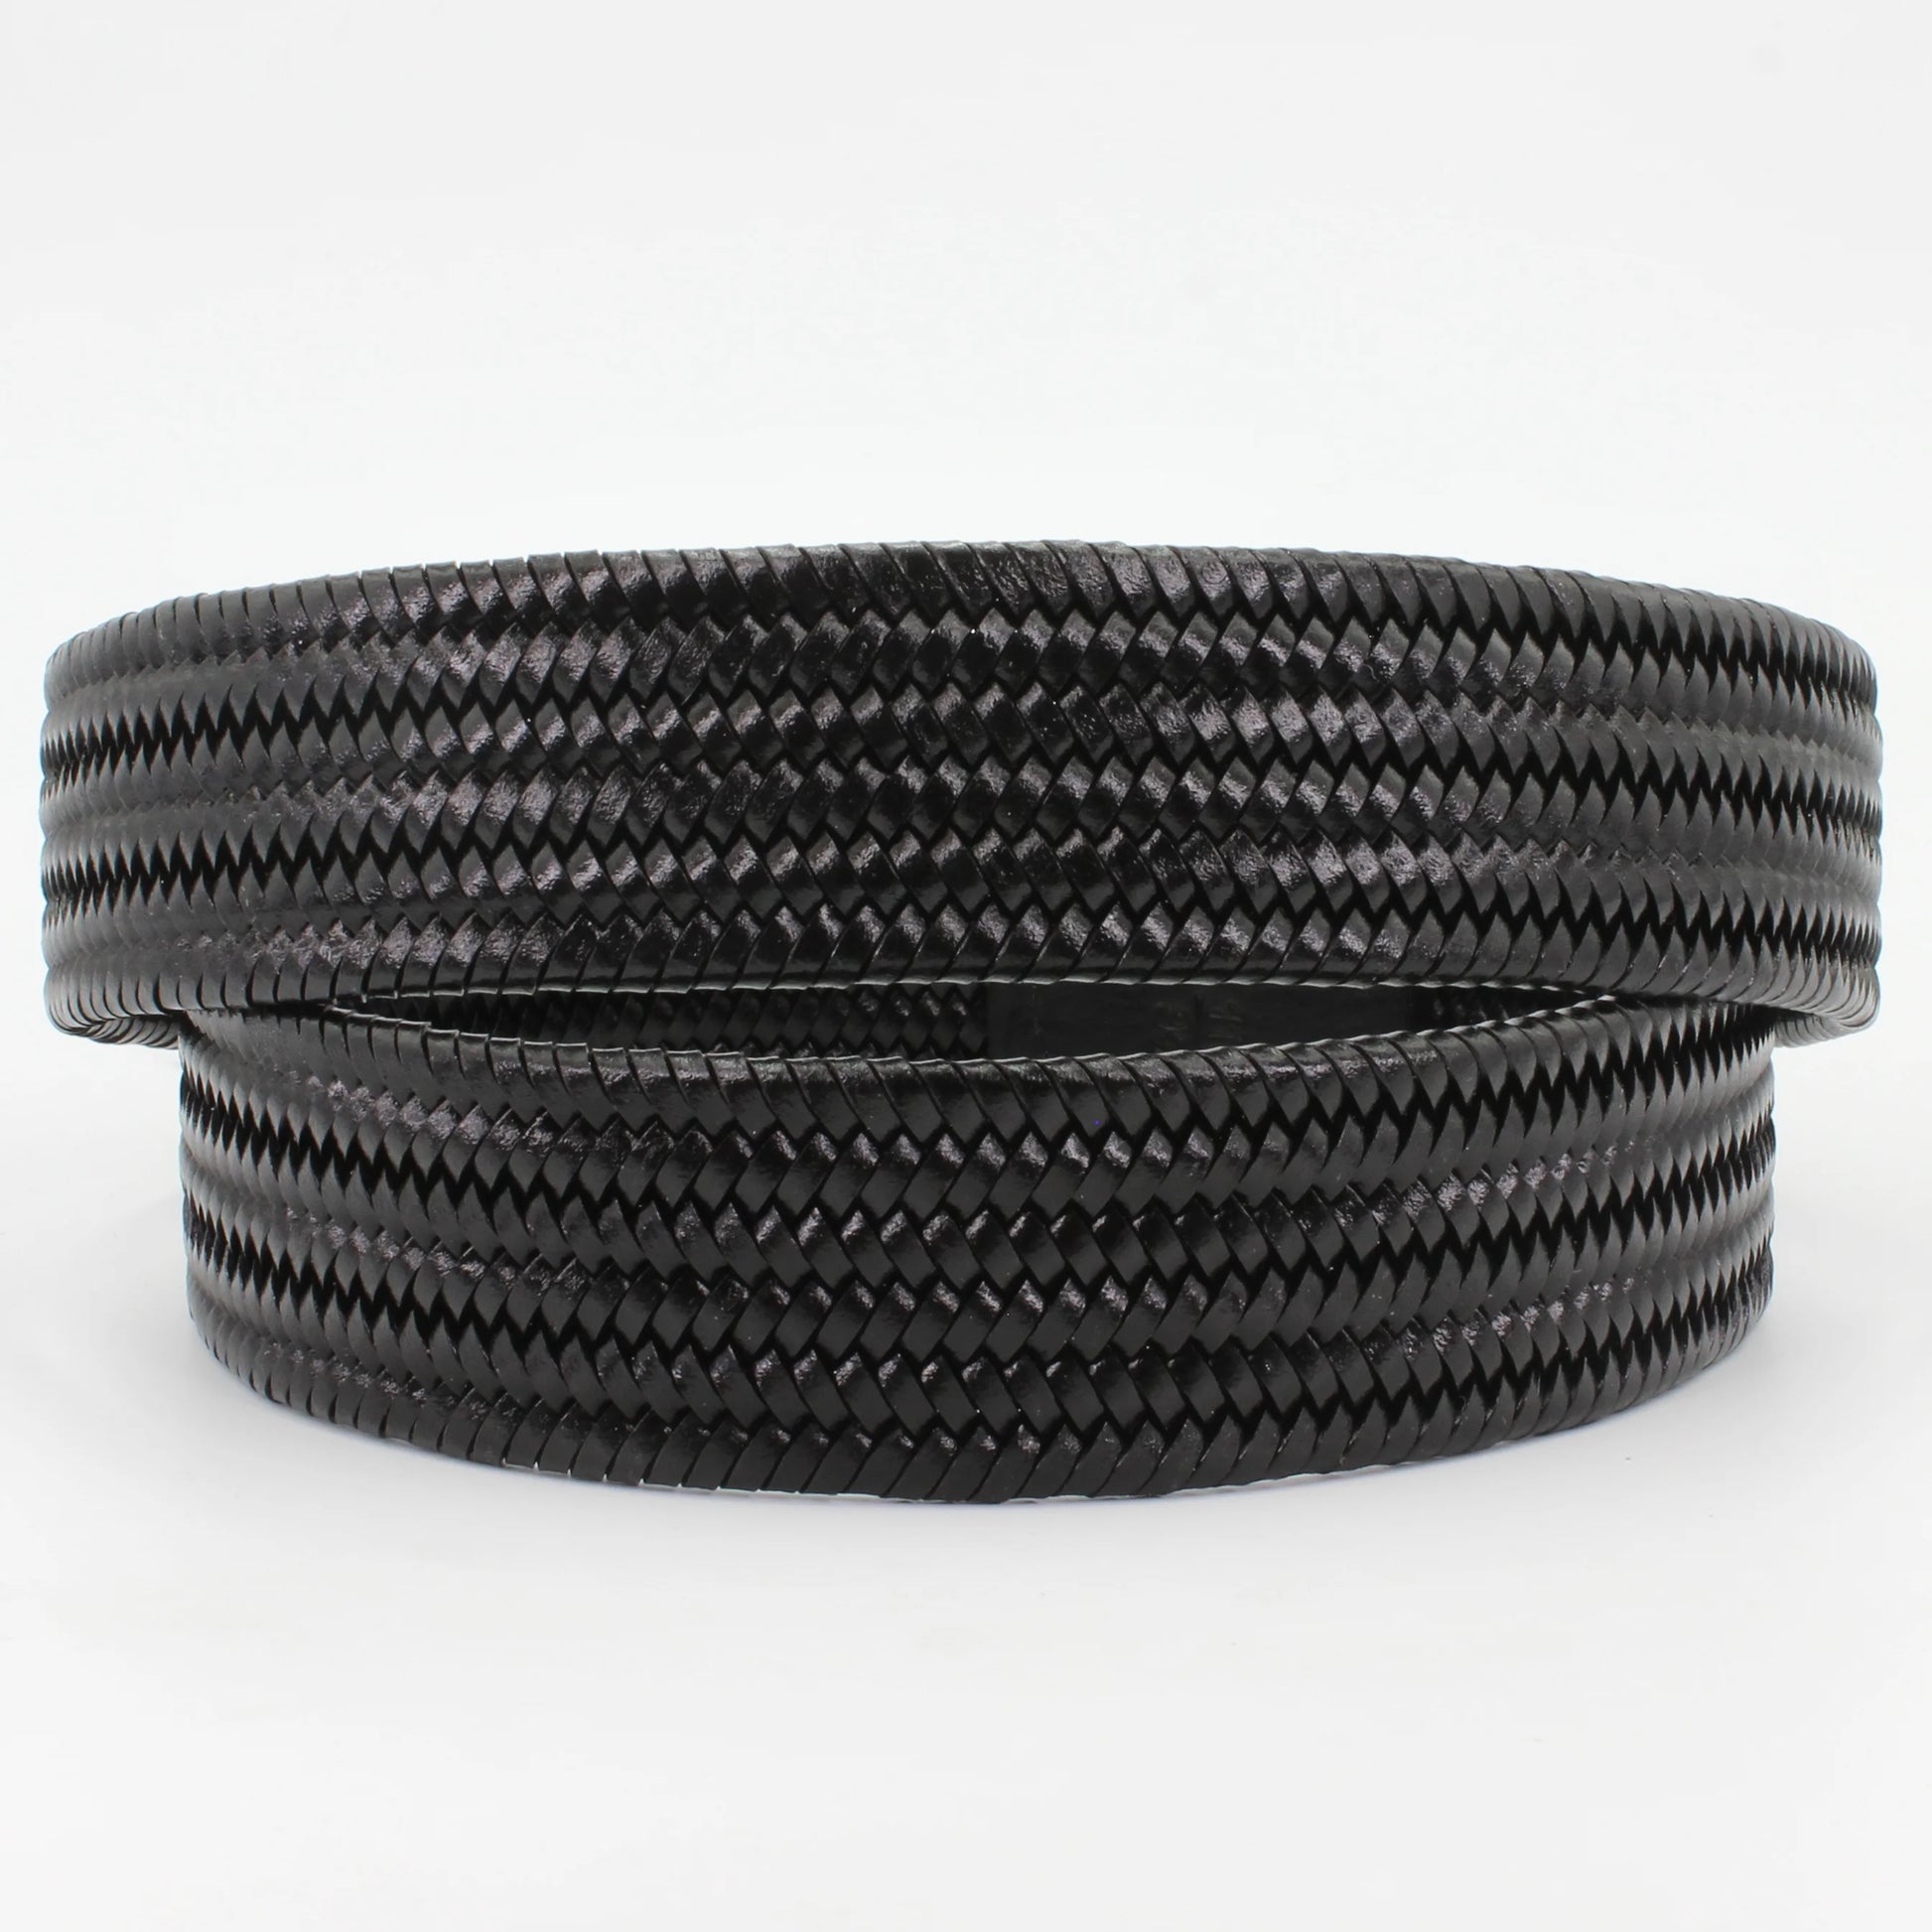 Shop our Italian-made Cuoieria Fiorentina leather woven belt in nero (C10DGEL00G000) or browse our range of Italian belts for men & women in-store at Aliverti Cape Town, or shop online.   We deliver in South Africa & offer multiple payment plans as well as accept multiple safe & secure payment methods.